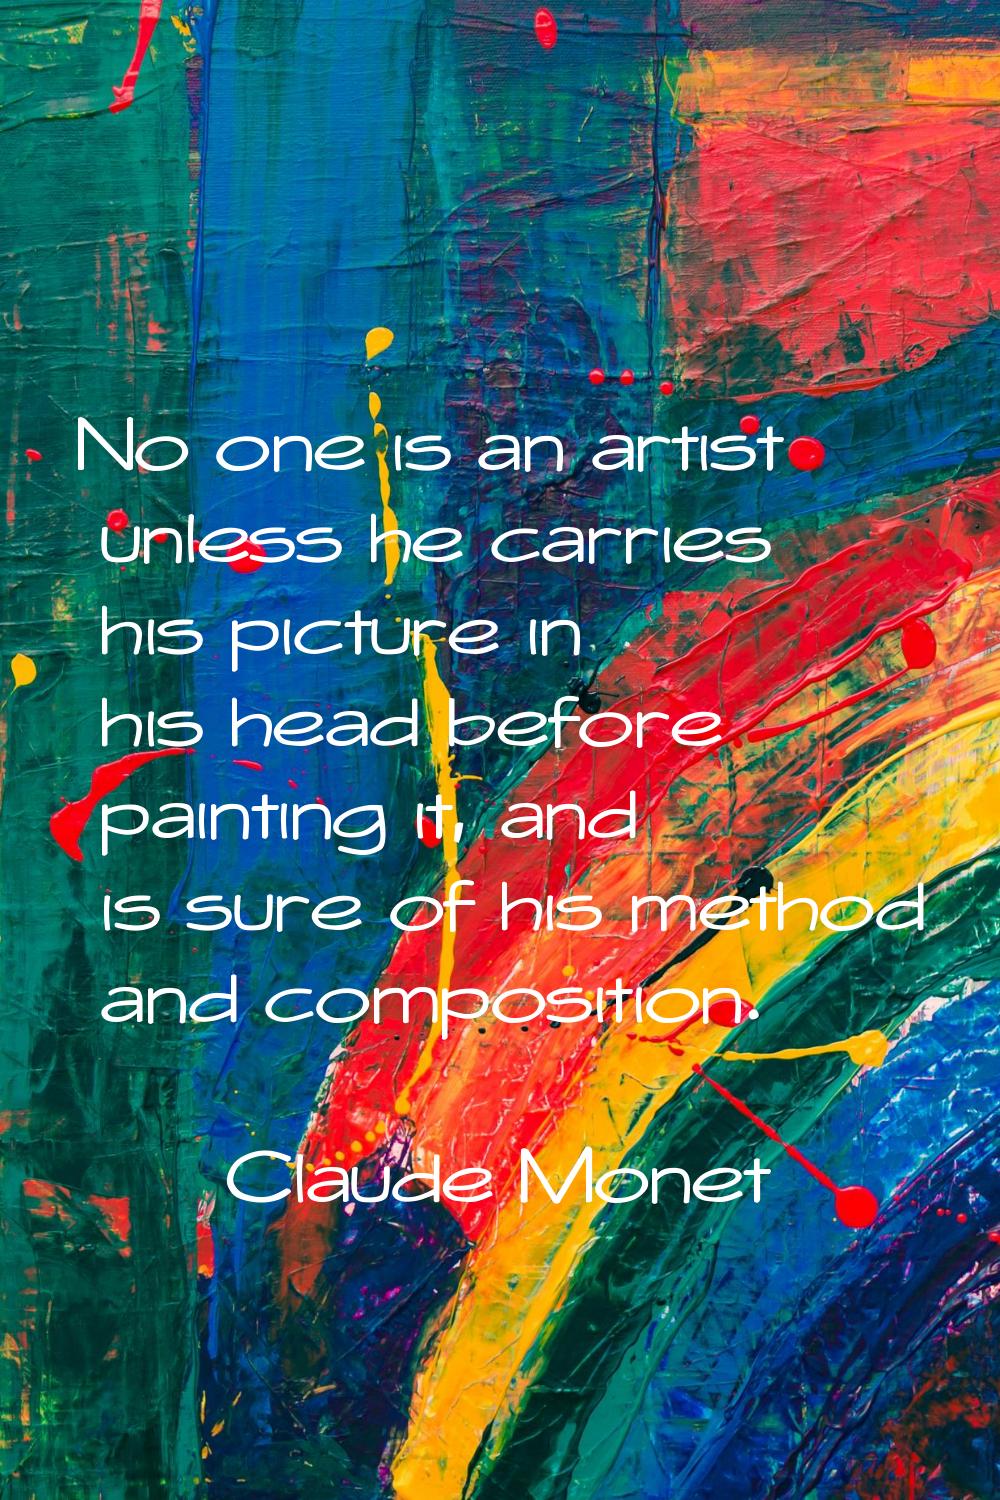 No one is an artist unless he carries his picture in his head before painting it, and is sure of hi